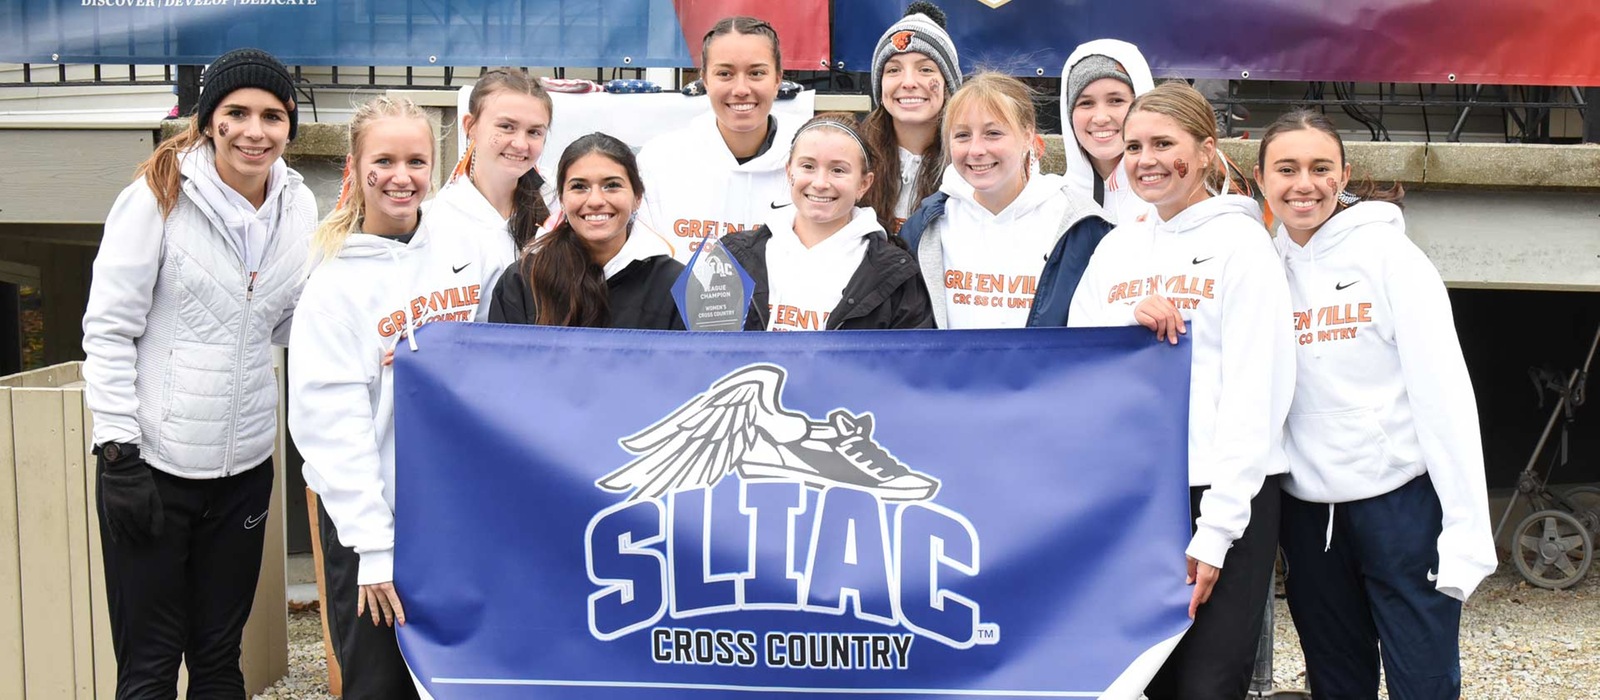 Women's cross country adds another SLIAC championship